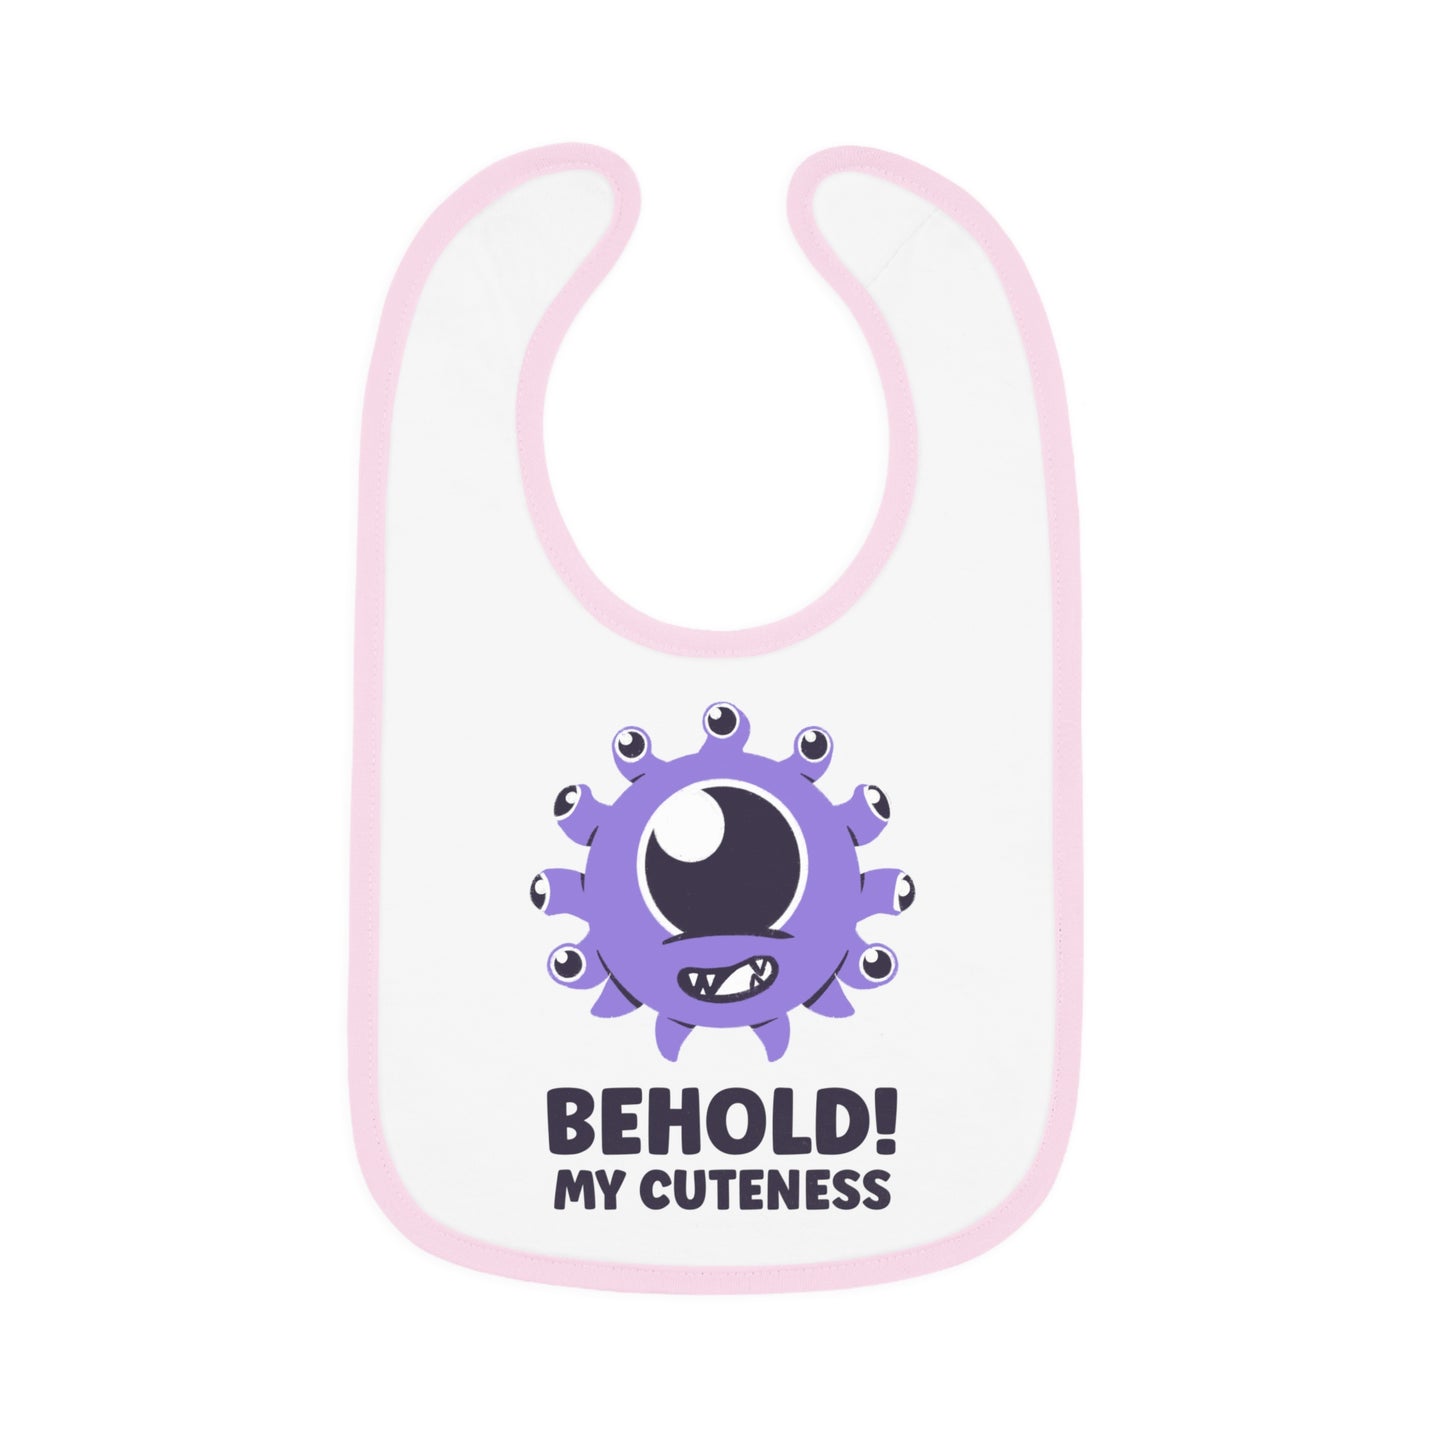 Behold My Cuteness - Cute Geeky Bib Gift for Newborn or New Parents